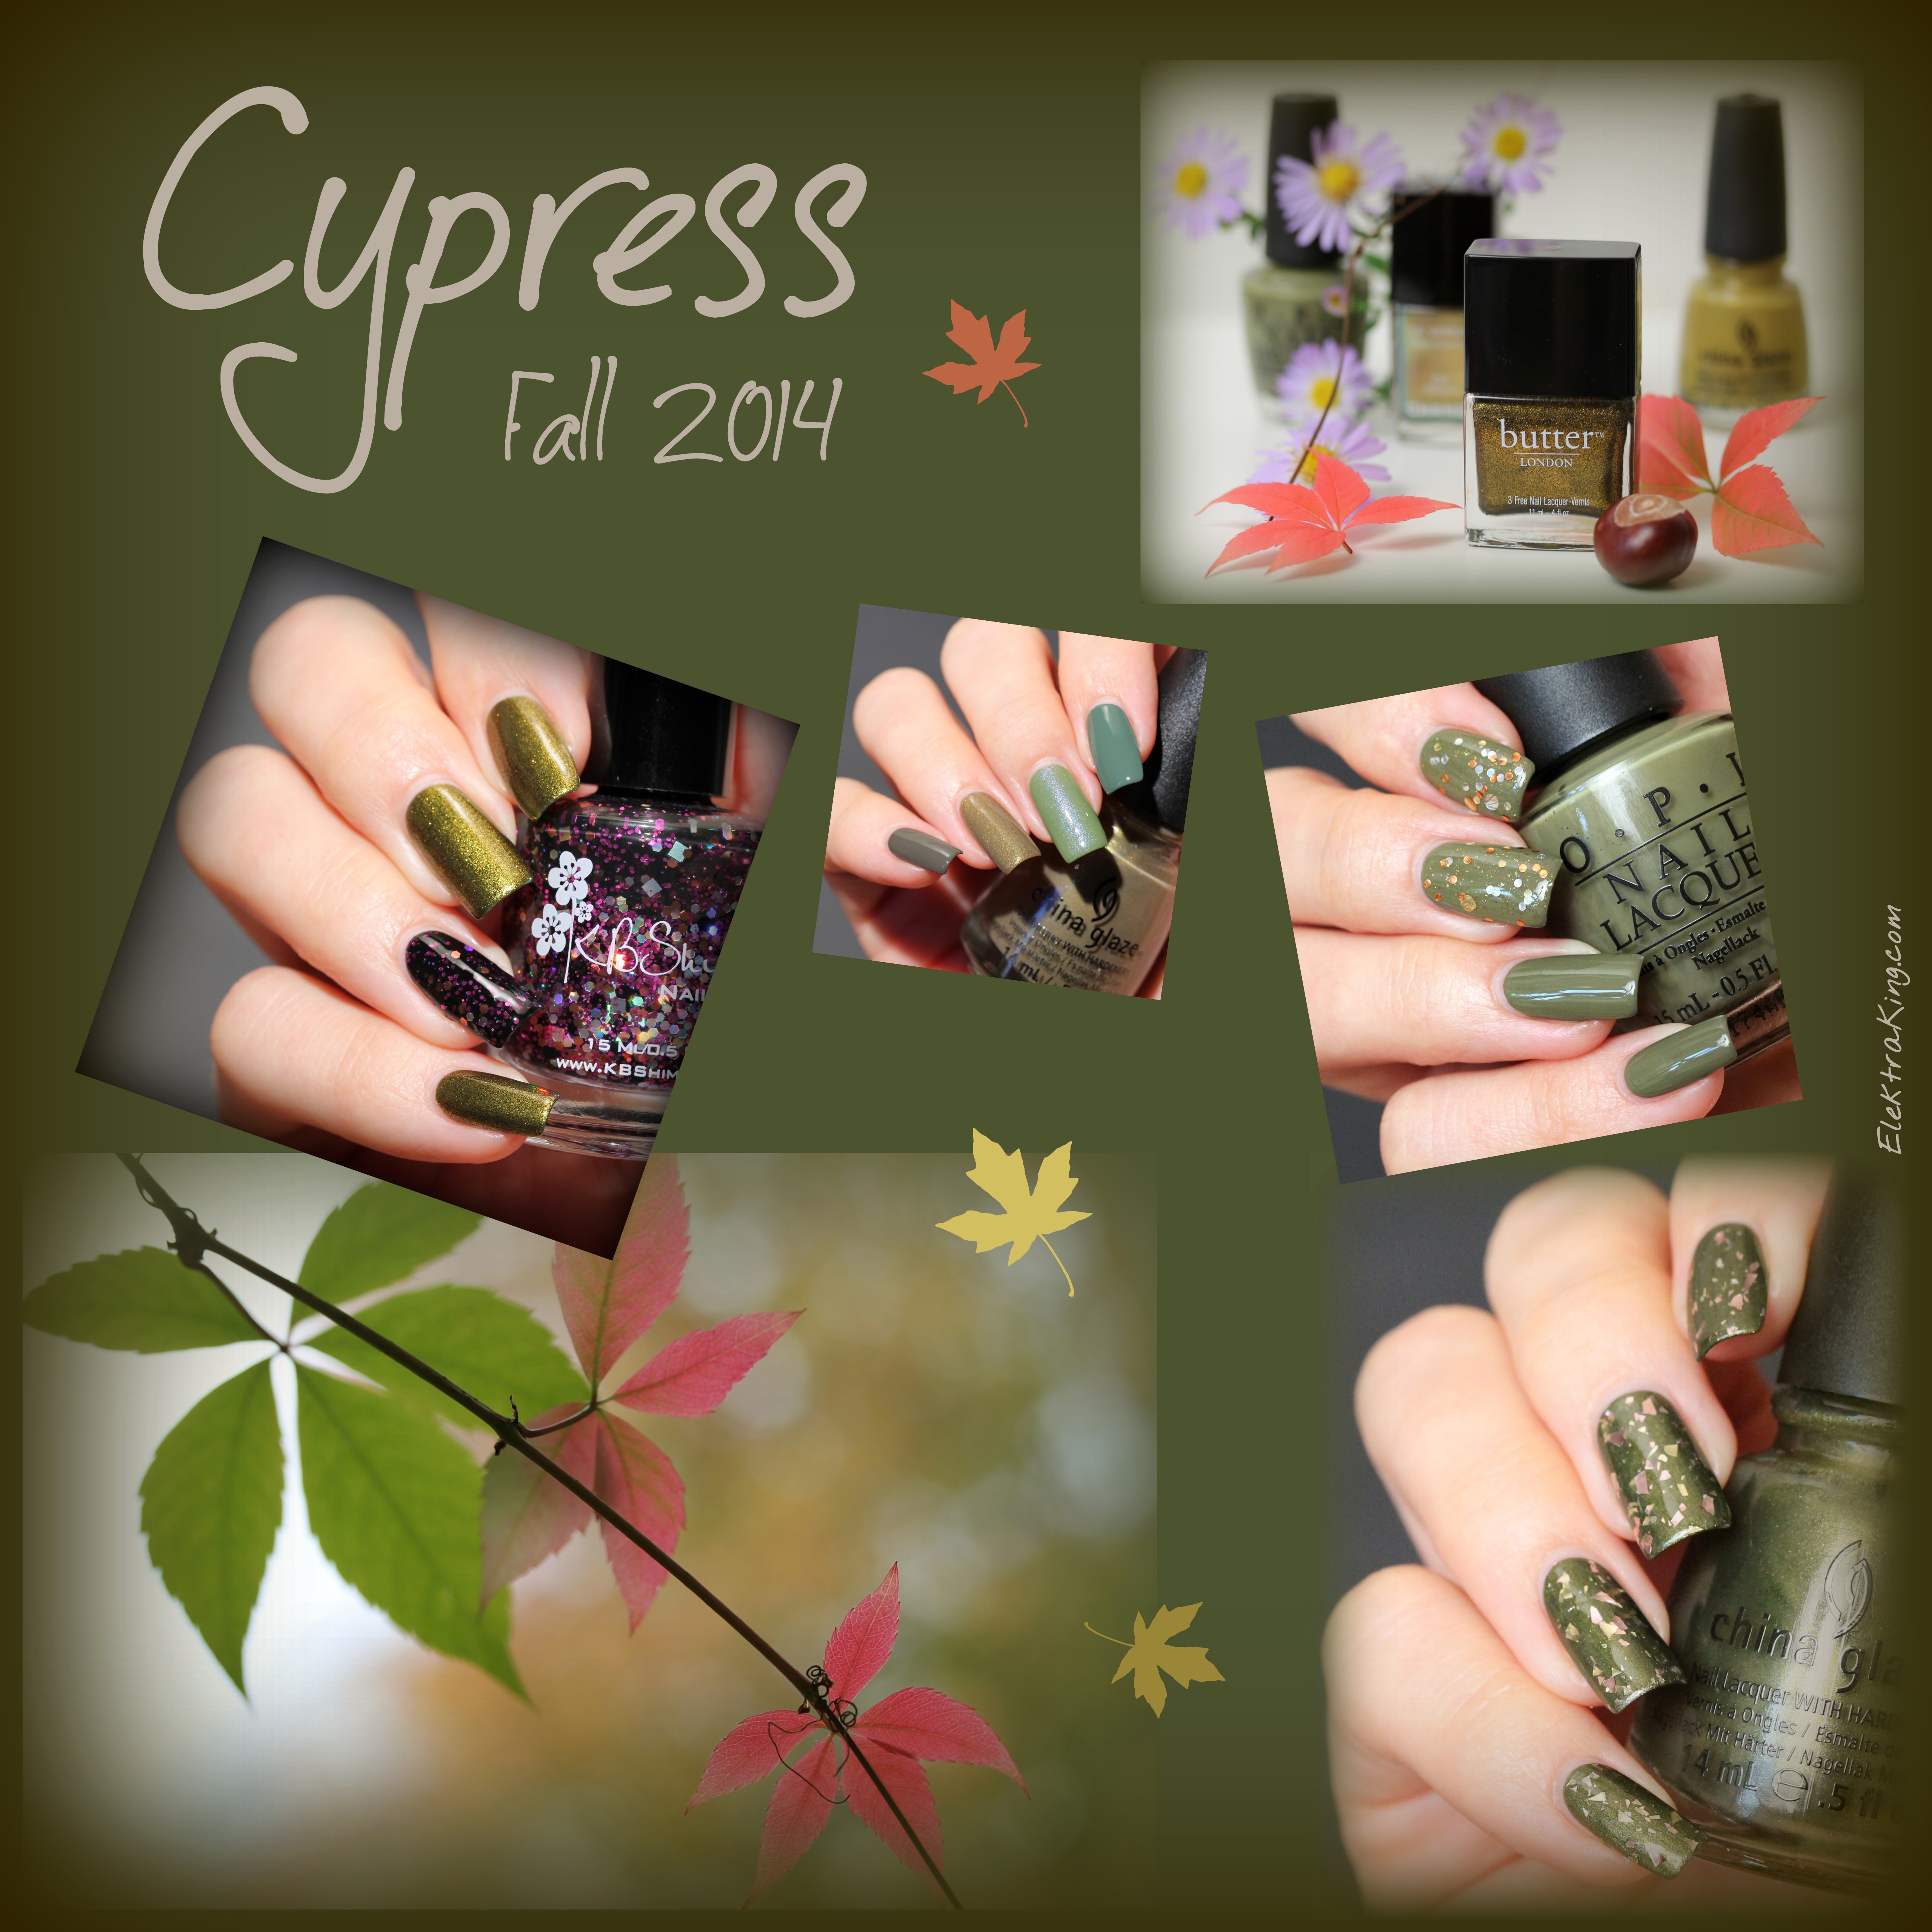 Color Trend Fall 2014: CYPRESS